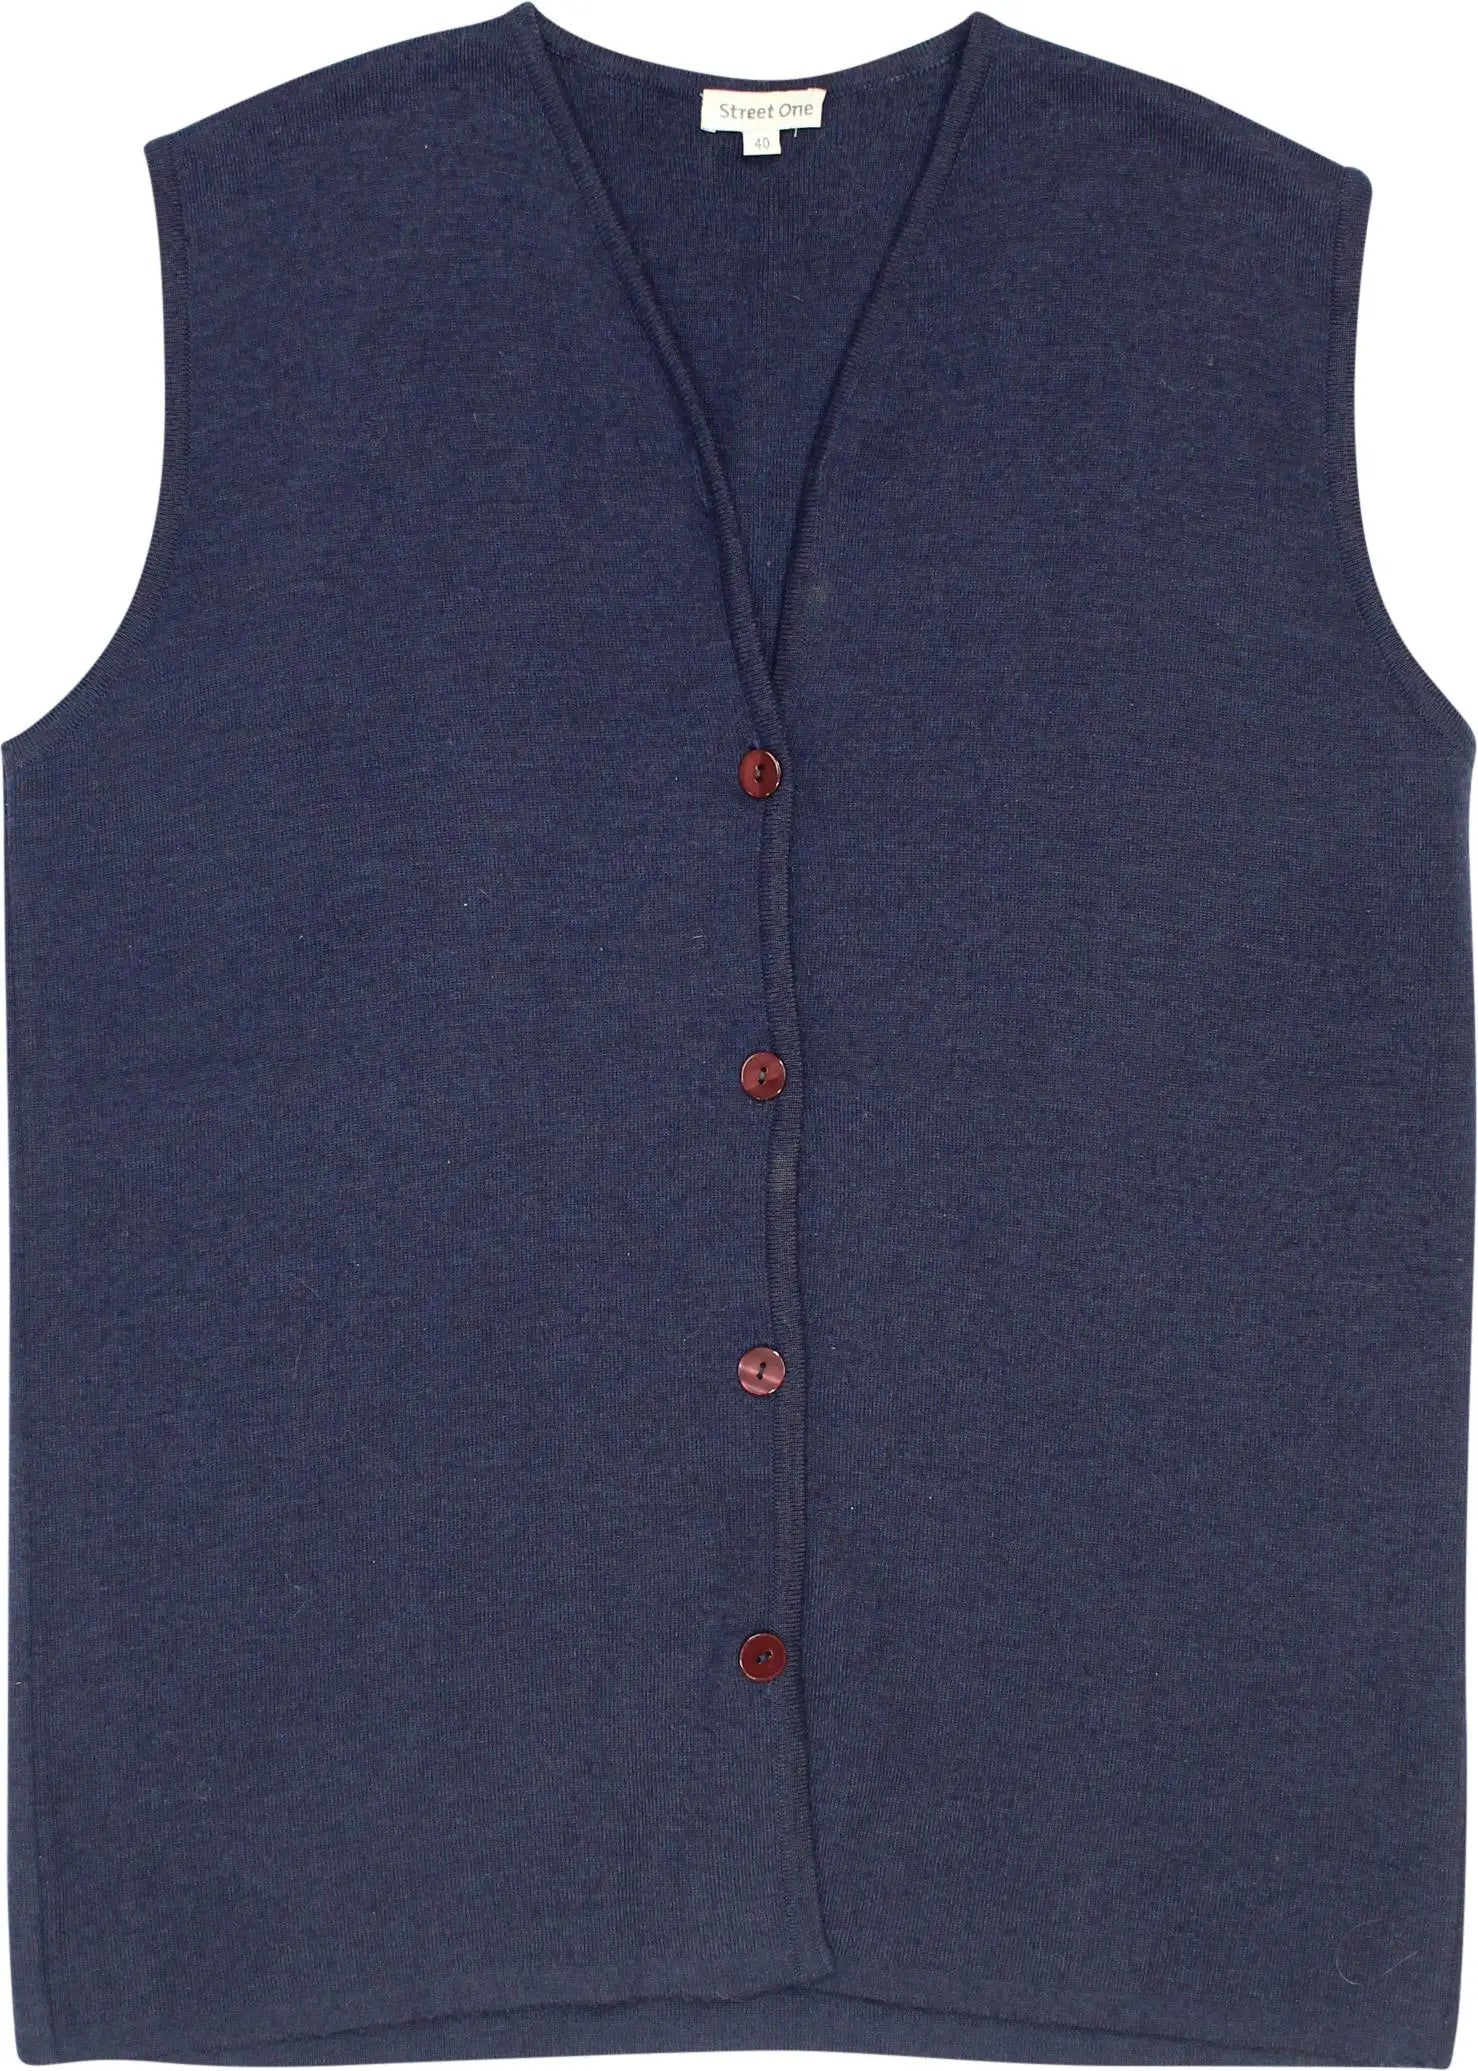 Street One - Knitted Vest- ThriftTale.com - Vintage and second handclothing